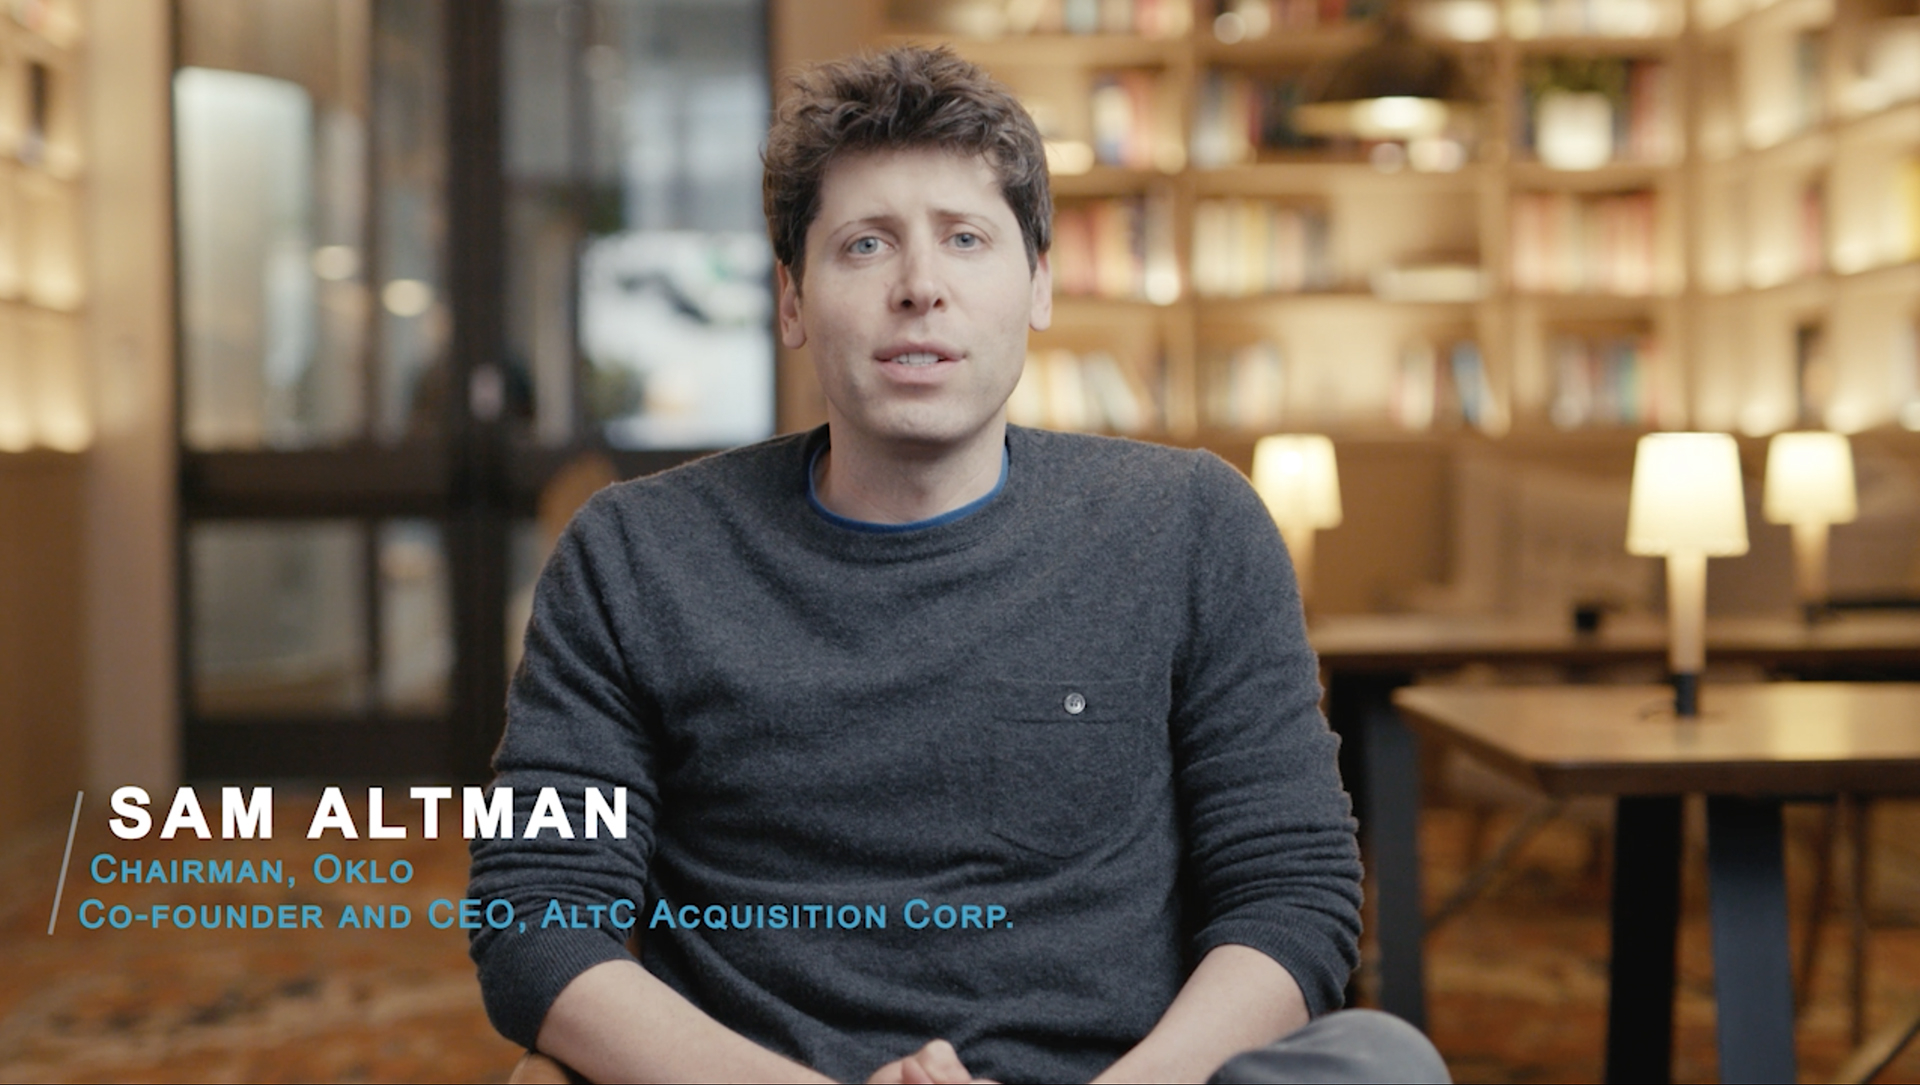 Sam Altman, co-founder and CEO of AltC, explains why Oklo’s mission to provide clean, reliable, affordable energy on a global scale is so important for our future.